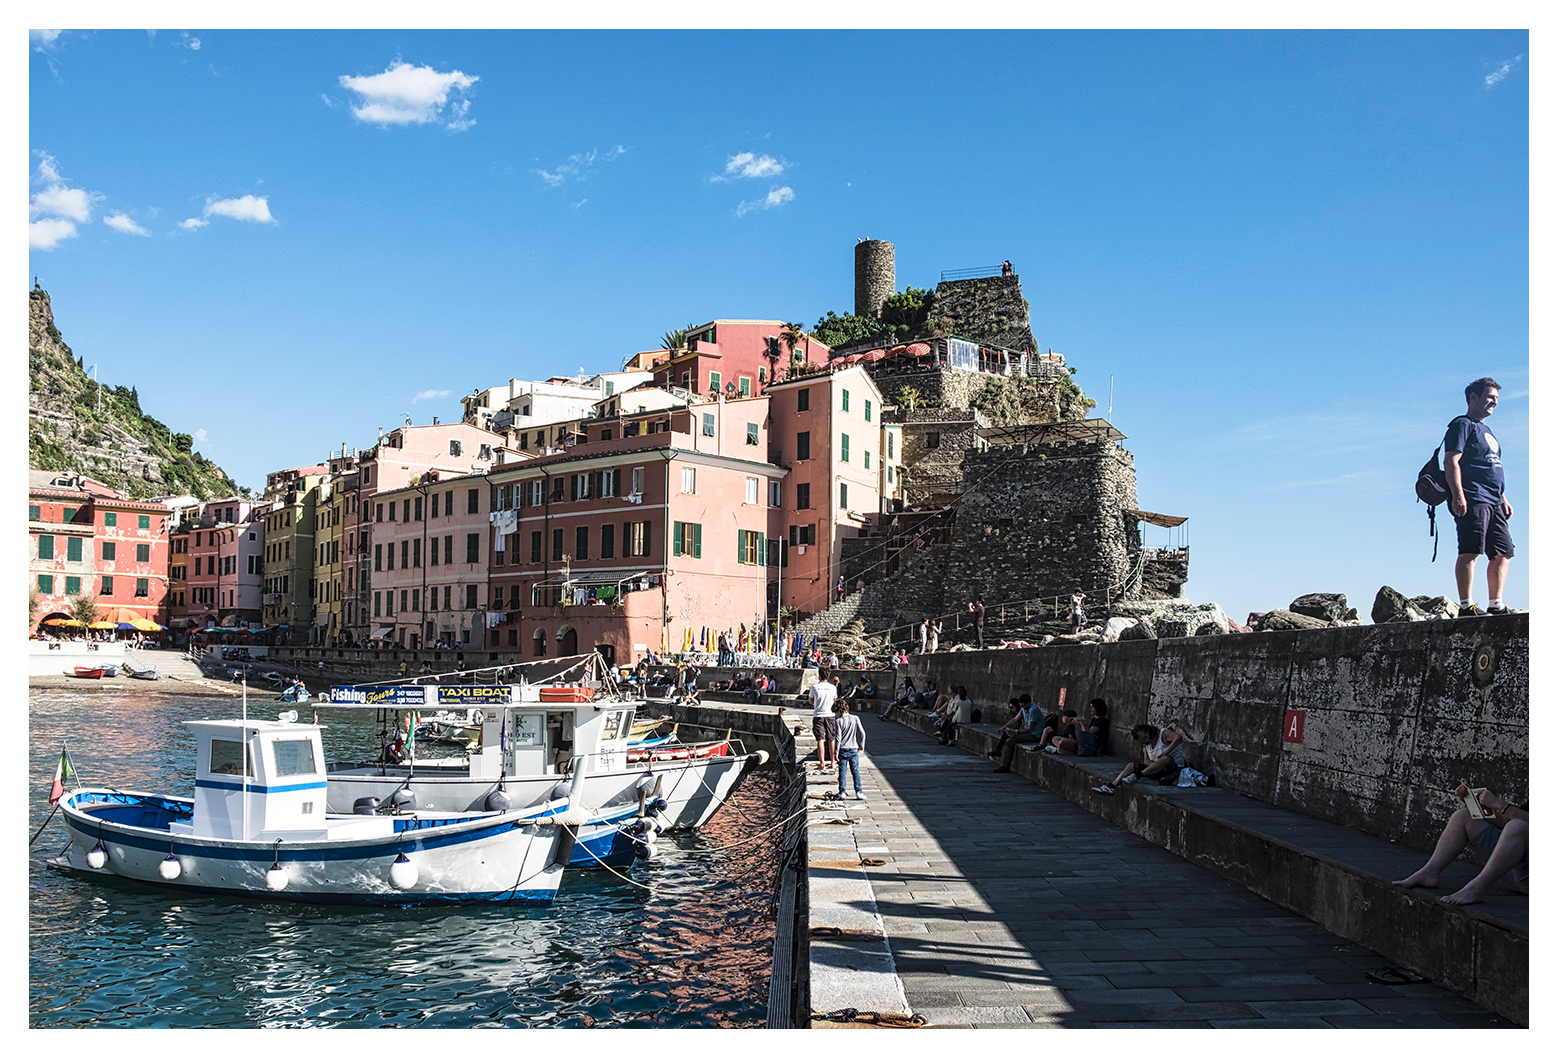 Postcard from Vernazza...